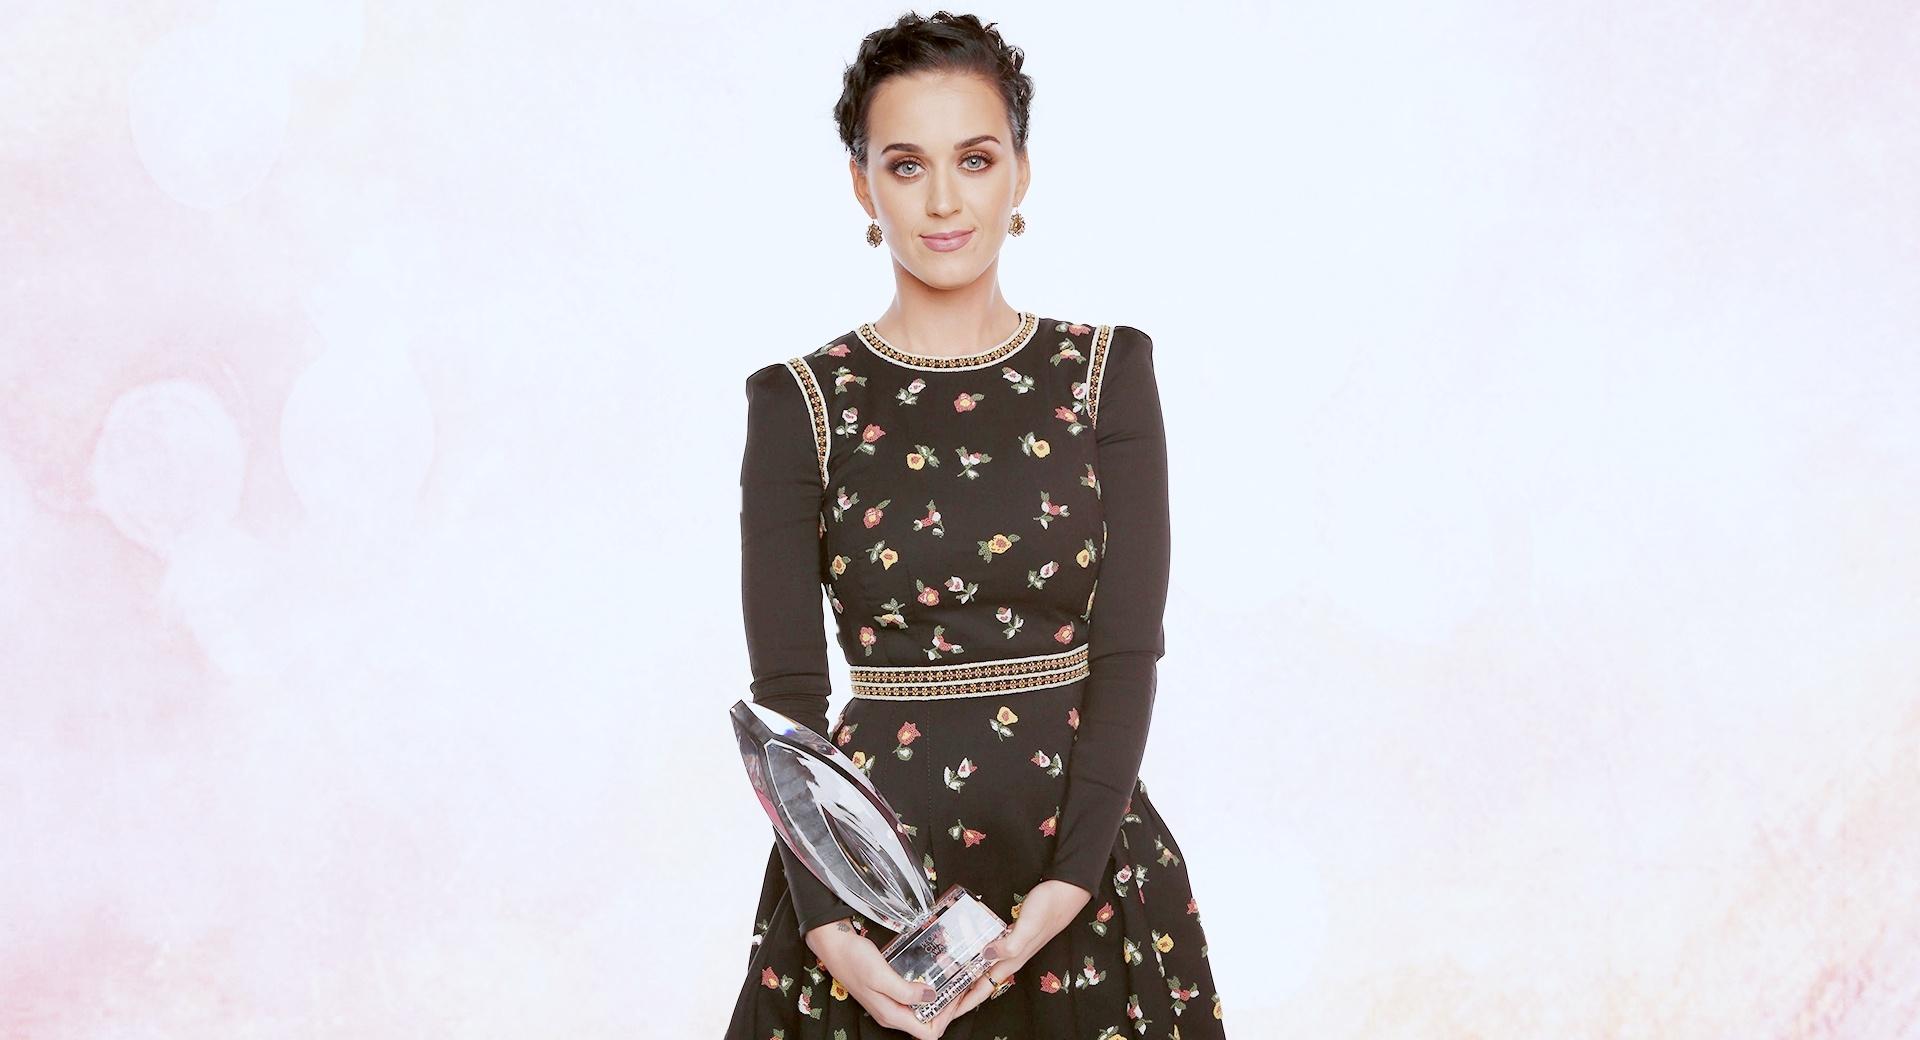 Katy Perry Peoples Choice Awards 2013 wallpapers HD quality